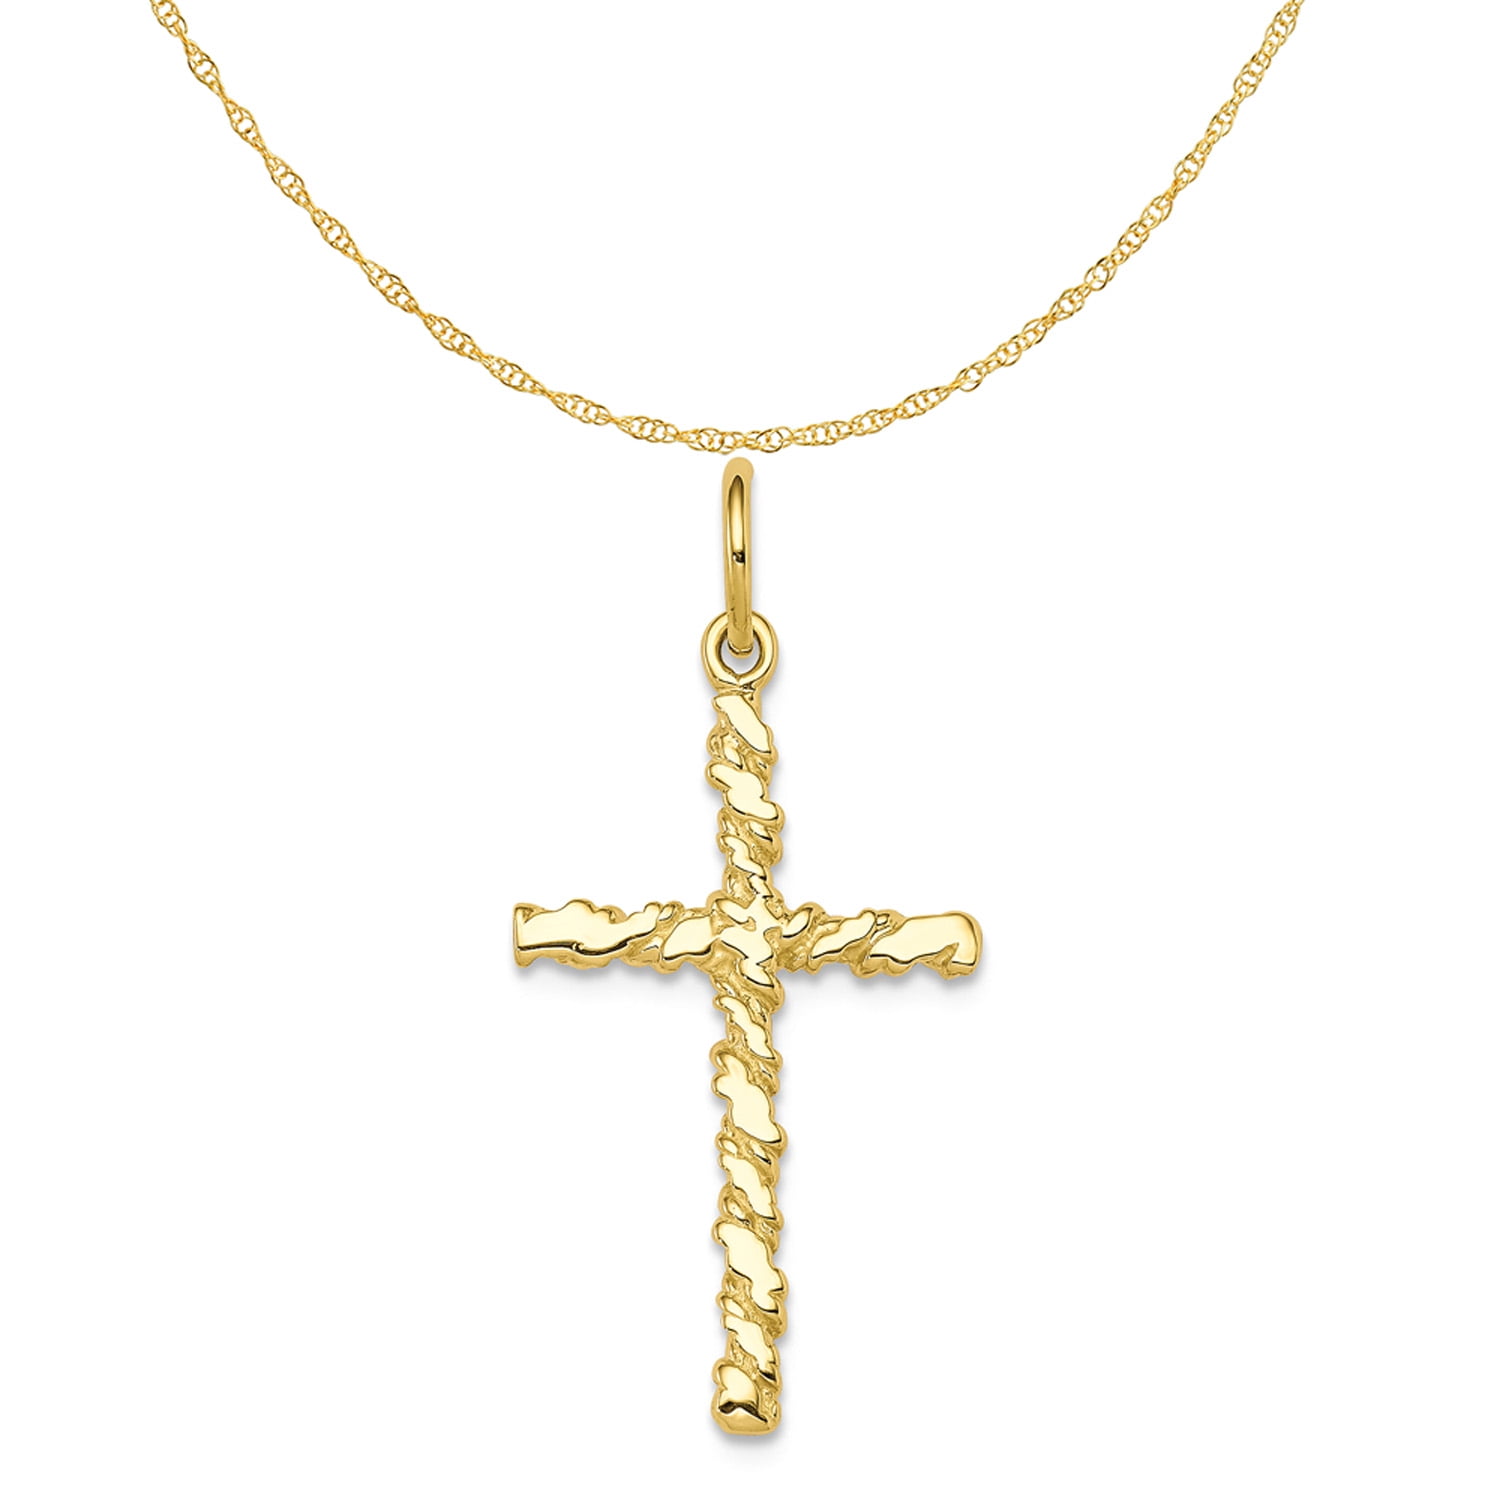 Charms for Bracelets and Necklaces 10k Yellow Gold Cross Country Skis Charm With Lobster Claw Clasp 